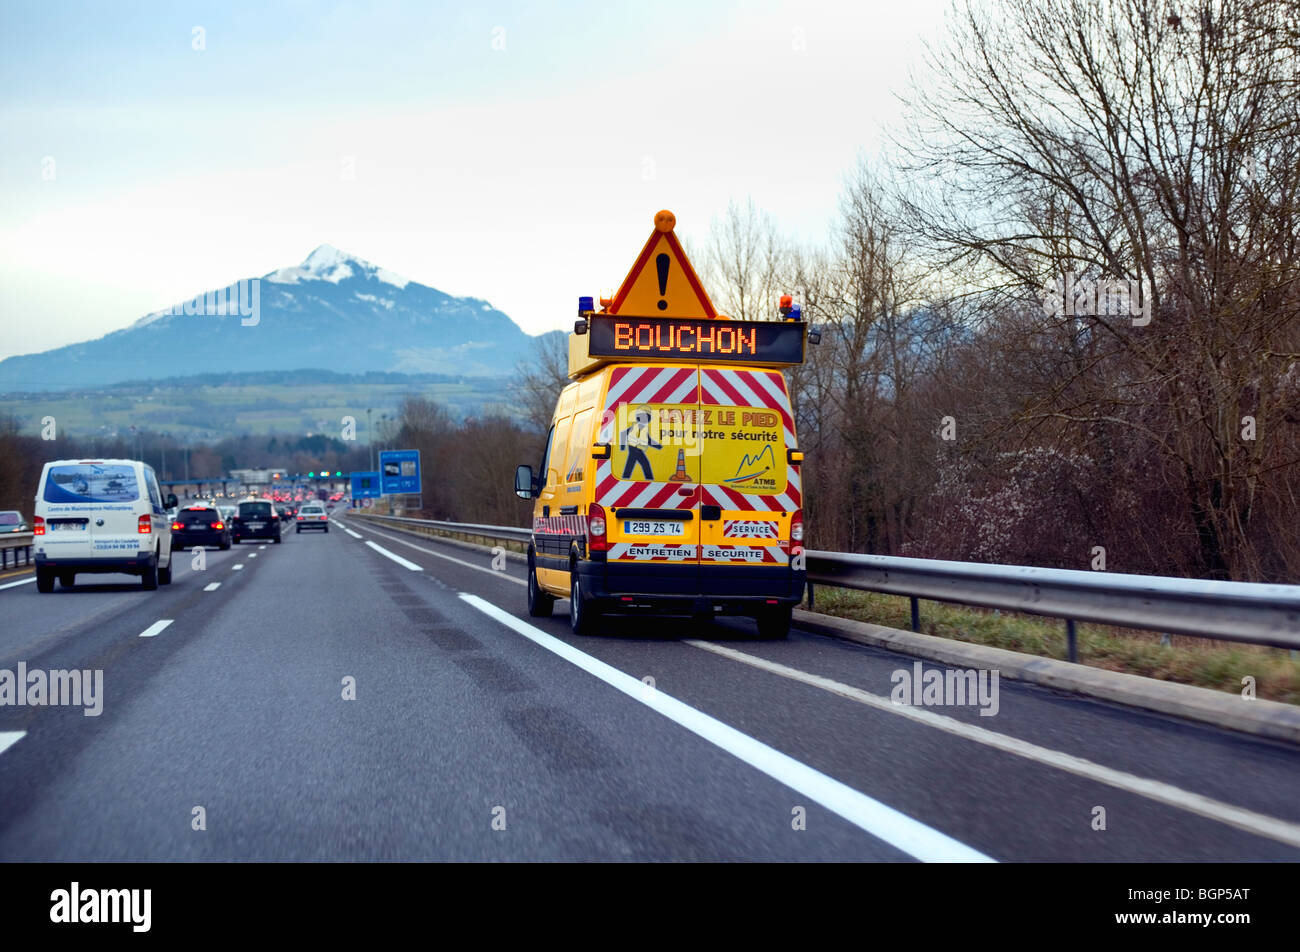 'Bouchon' warning approaching Toll Booth, France, Europe Stock Photo